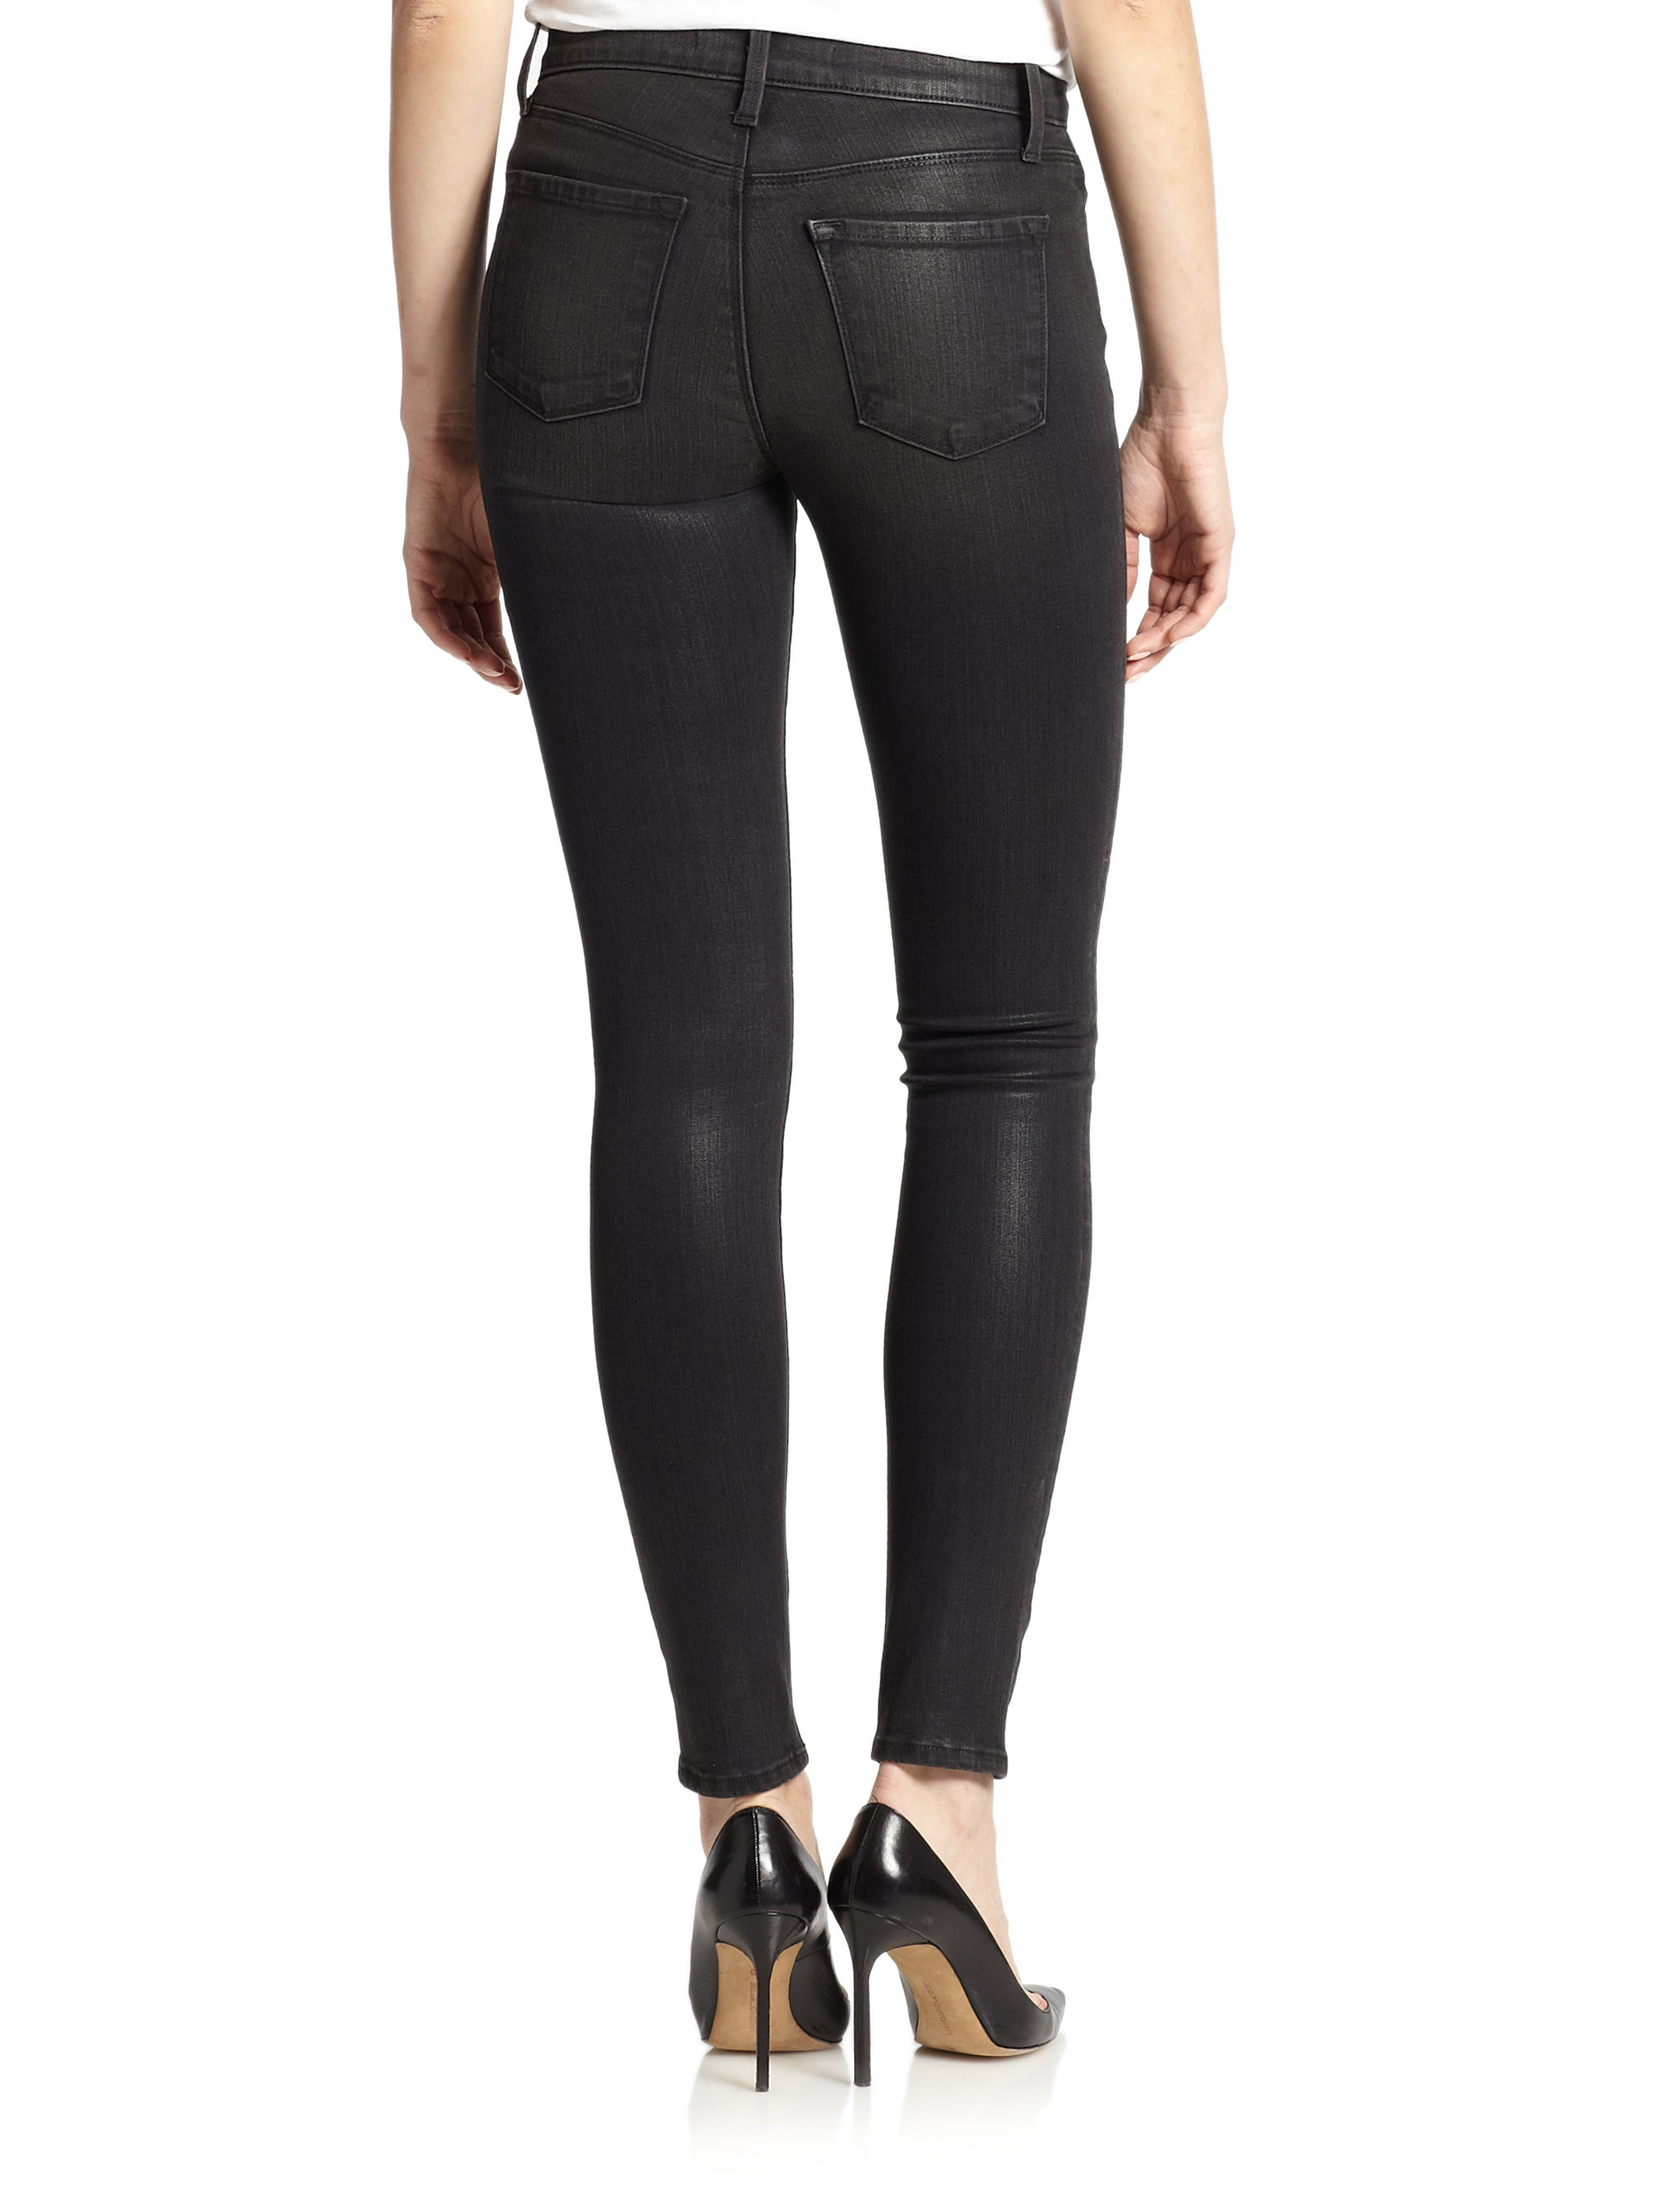 Lyst - J Brand Maria Photo-Ready Coated High-Rise Skinny Jeans in Blue